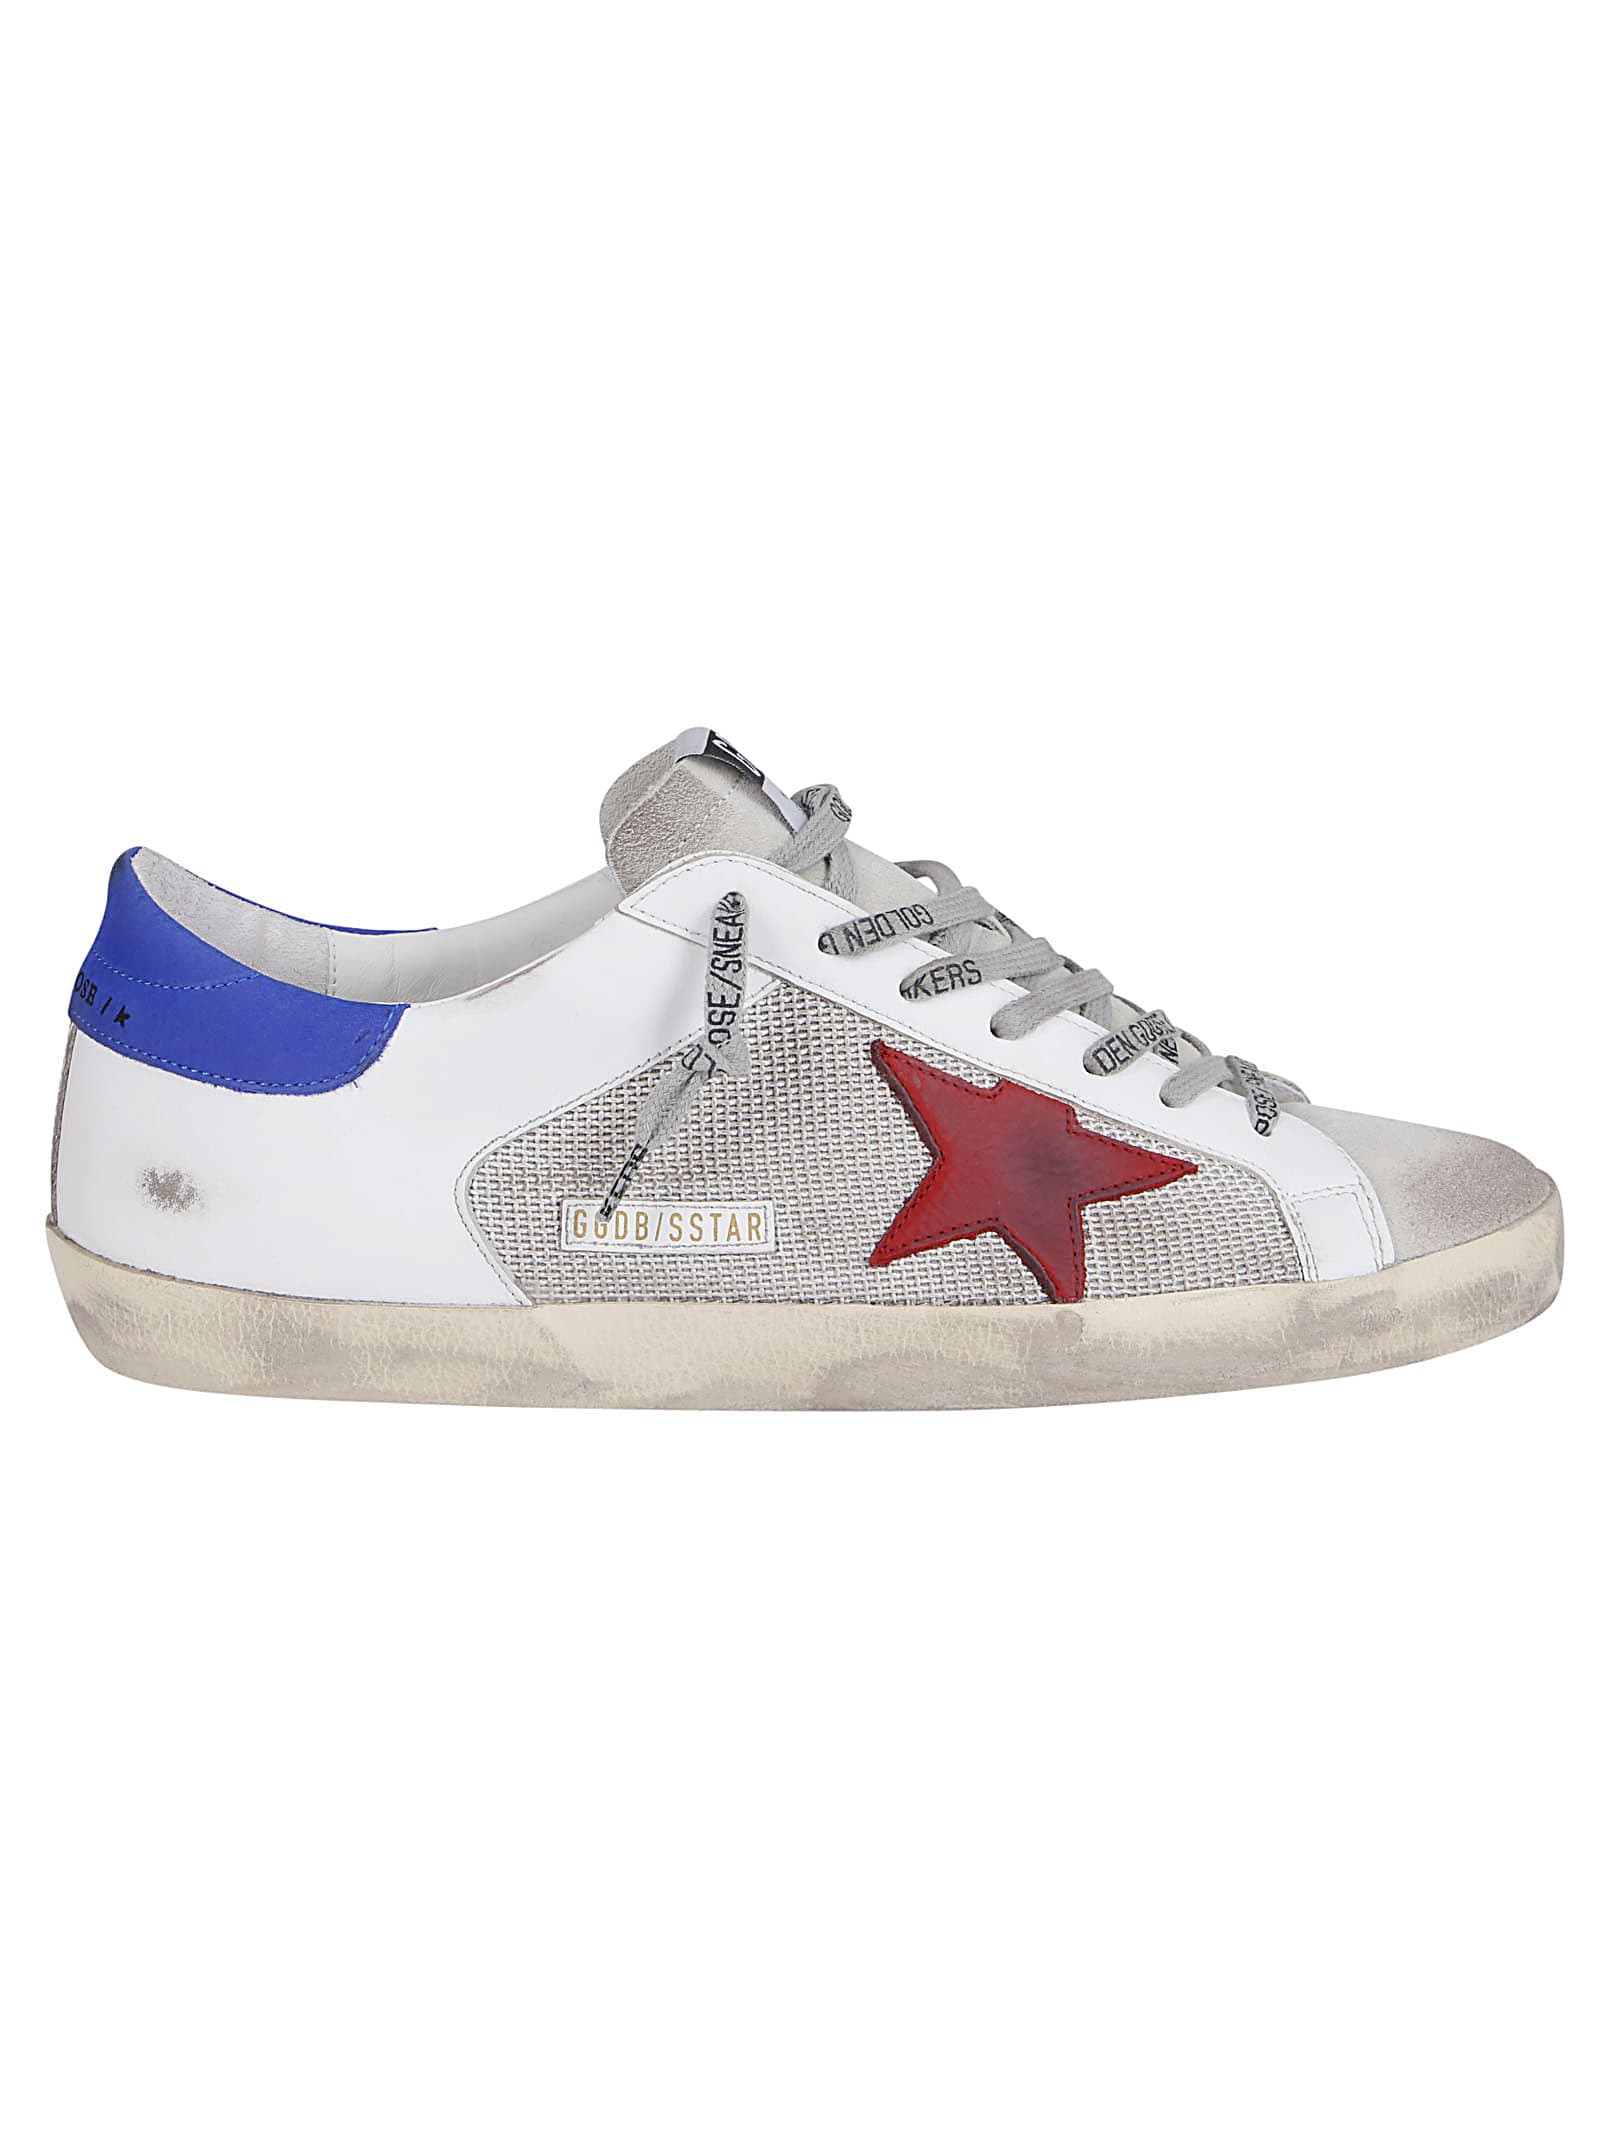 Shop Golden Goose White Leather And Canvas Super-star Sneakers In Silver/white/red/blue